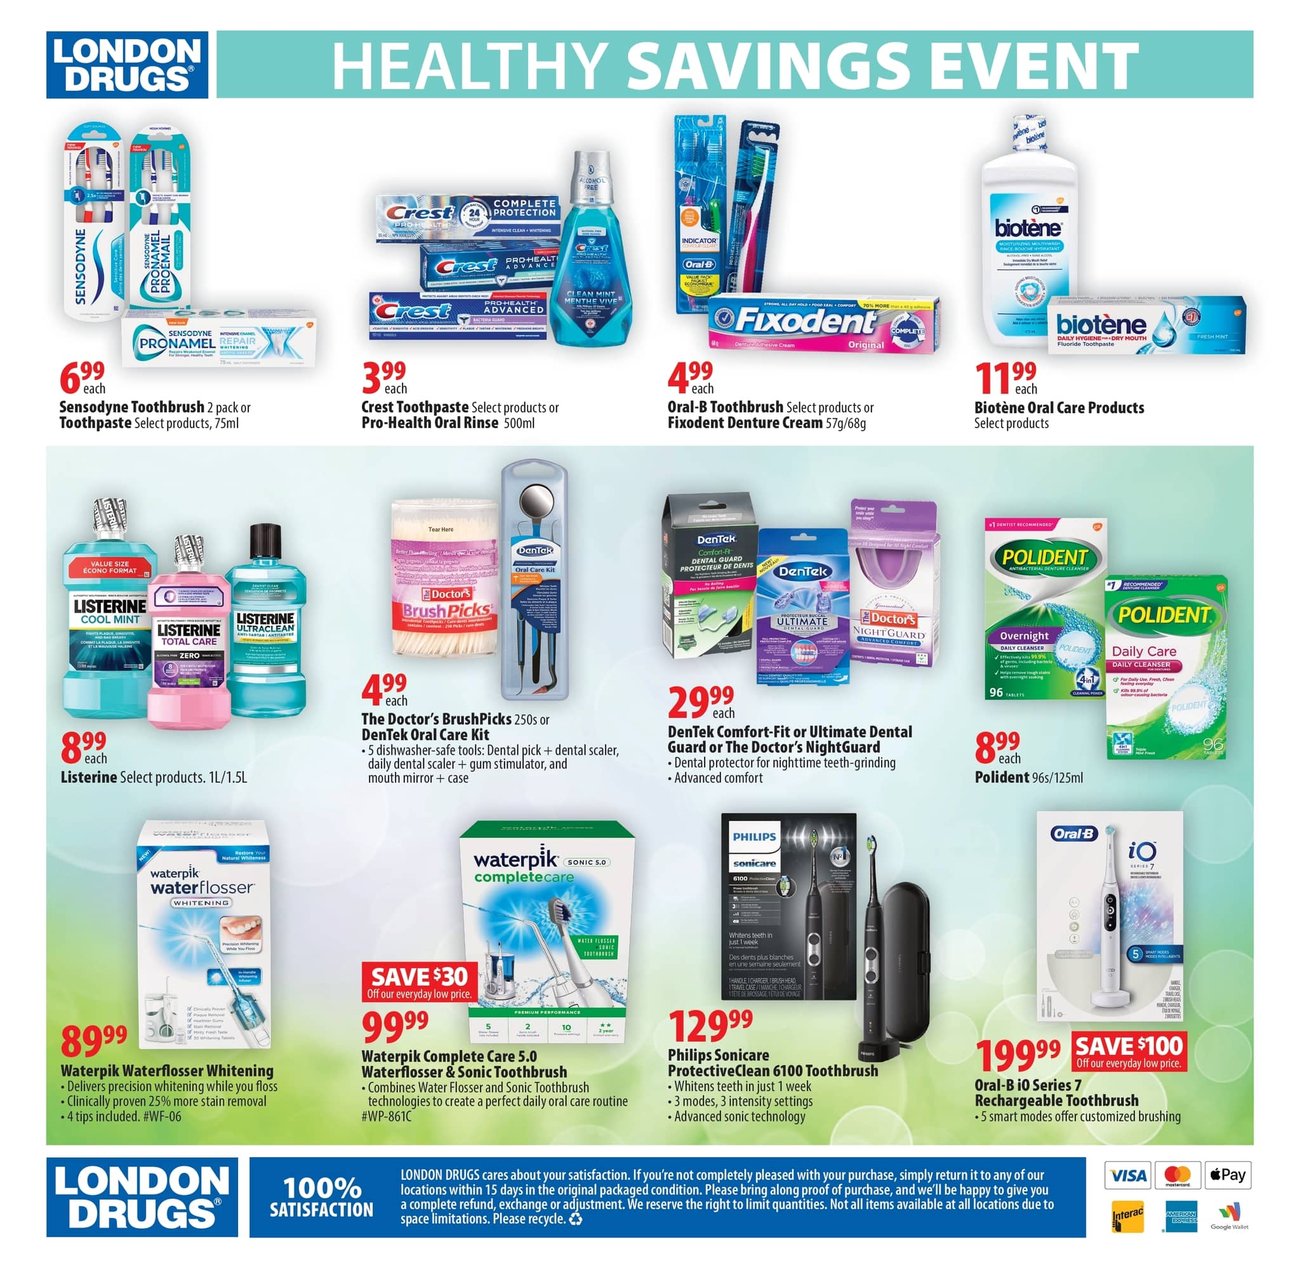 London Drugs - Healthy Savings Event - Page 4